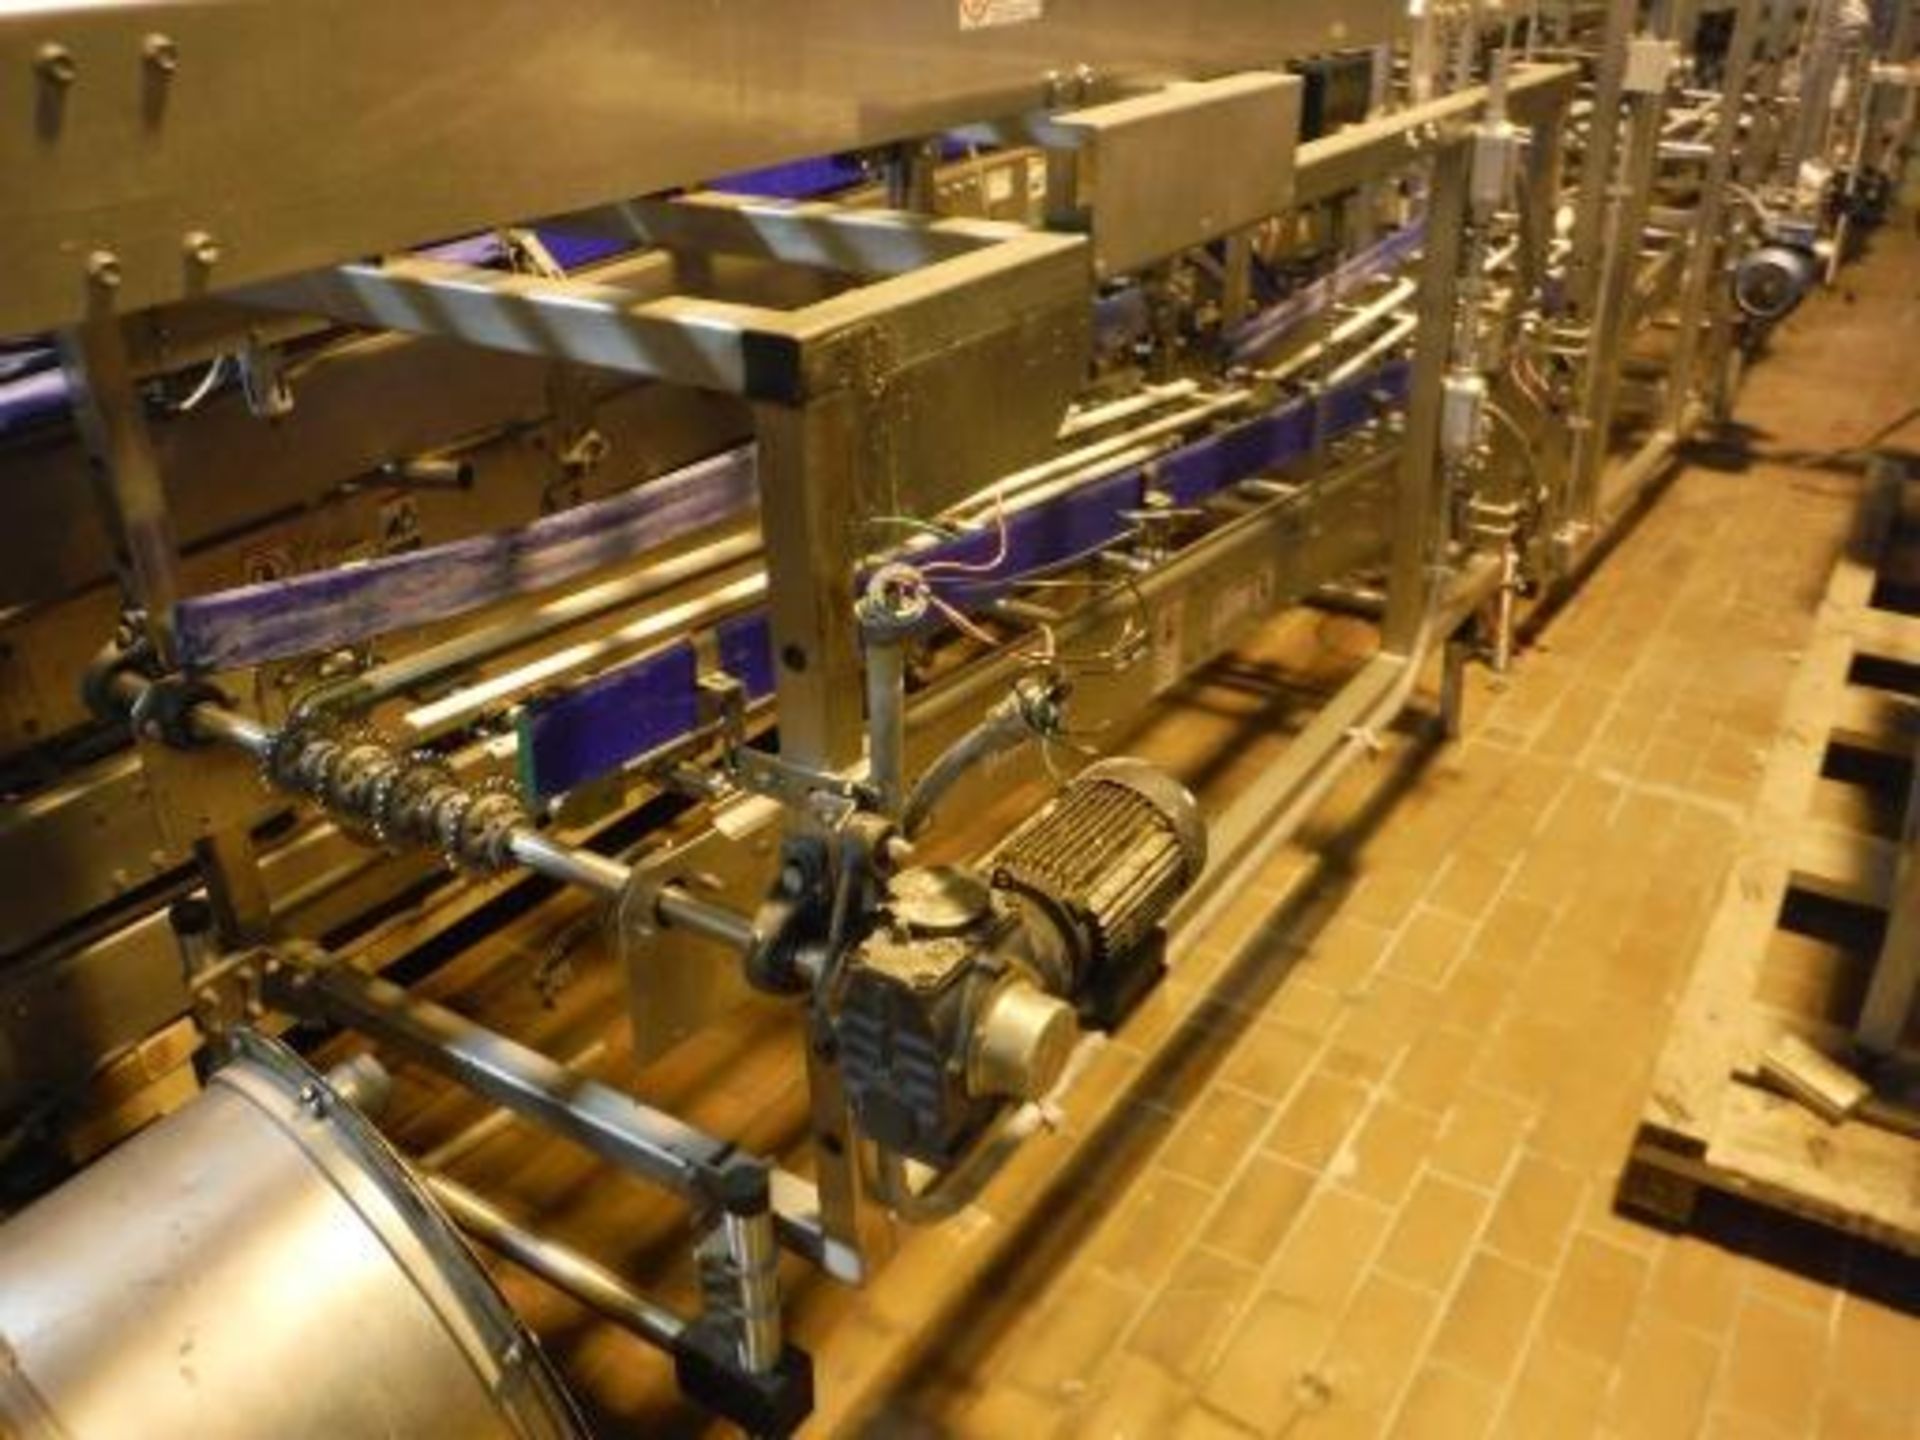 Lot of 5 conveyors approximately 90 in. long x 26 in. wide x 32 in. tall each, SS frames, with - Image 2 of 14